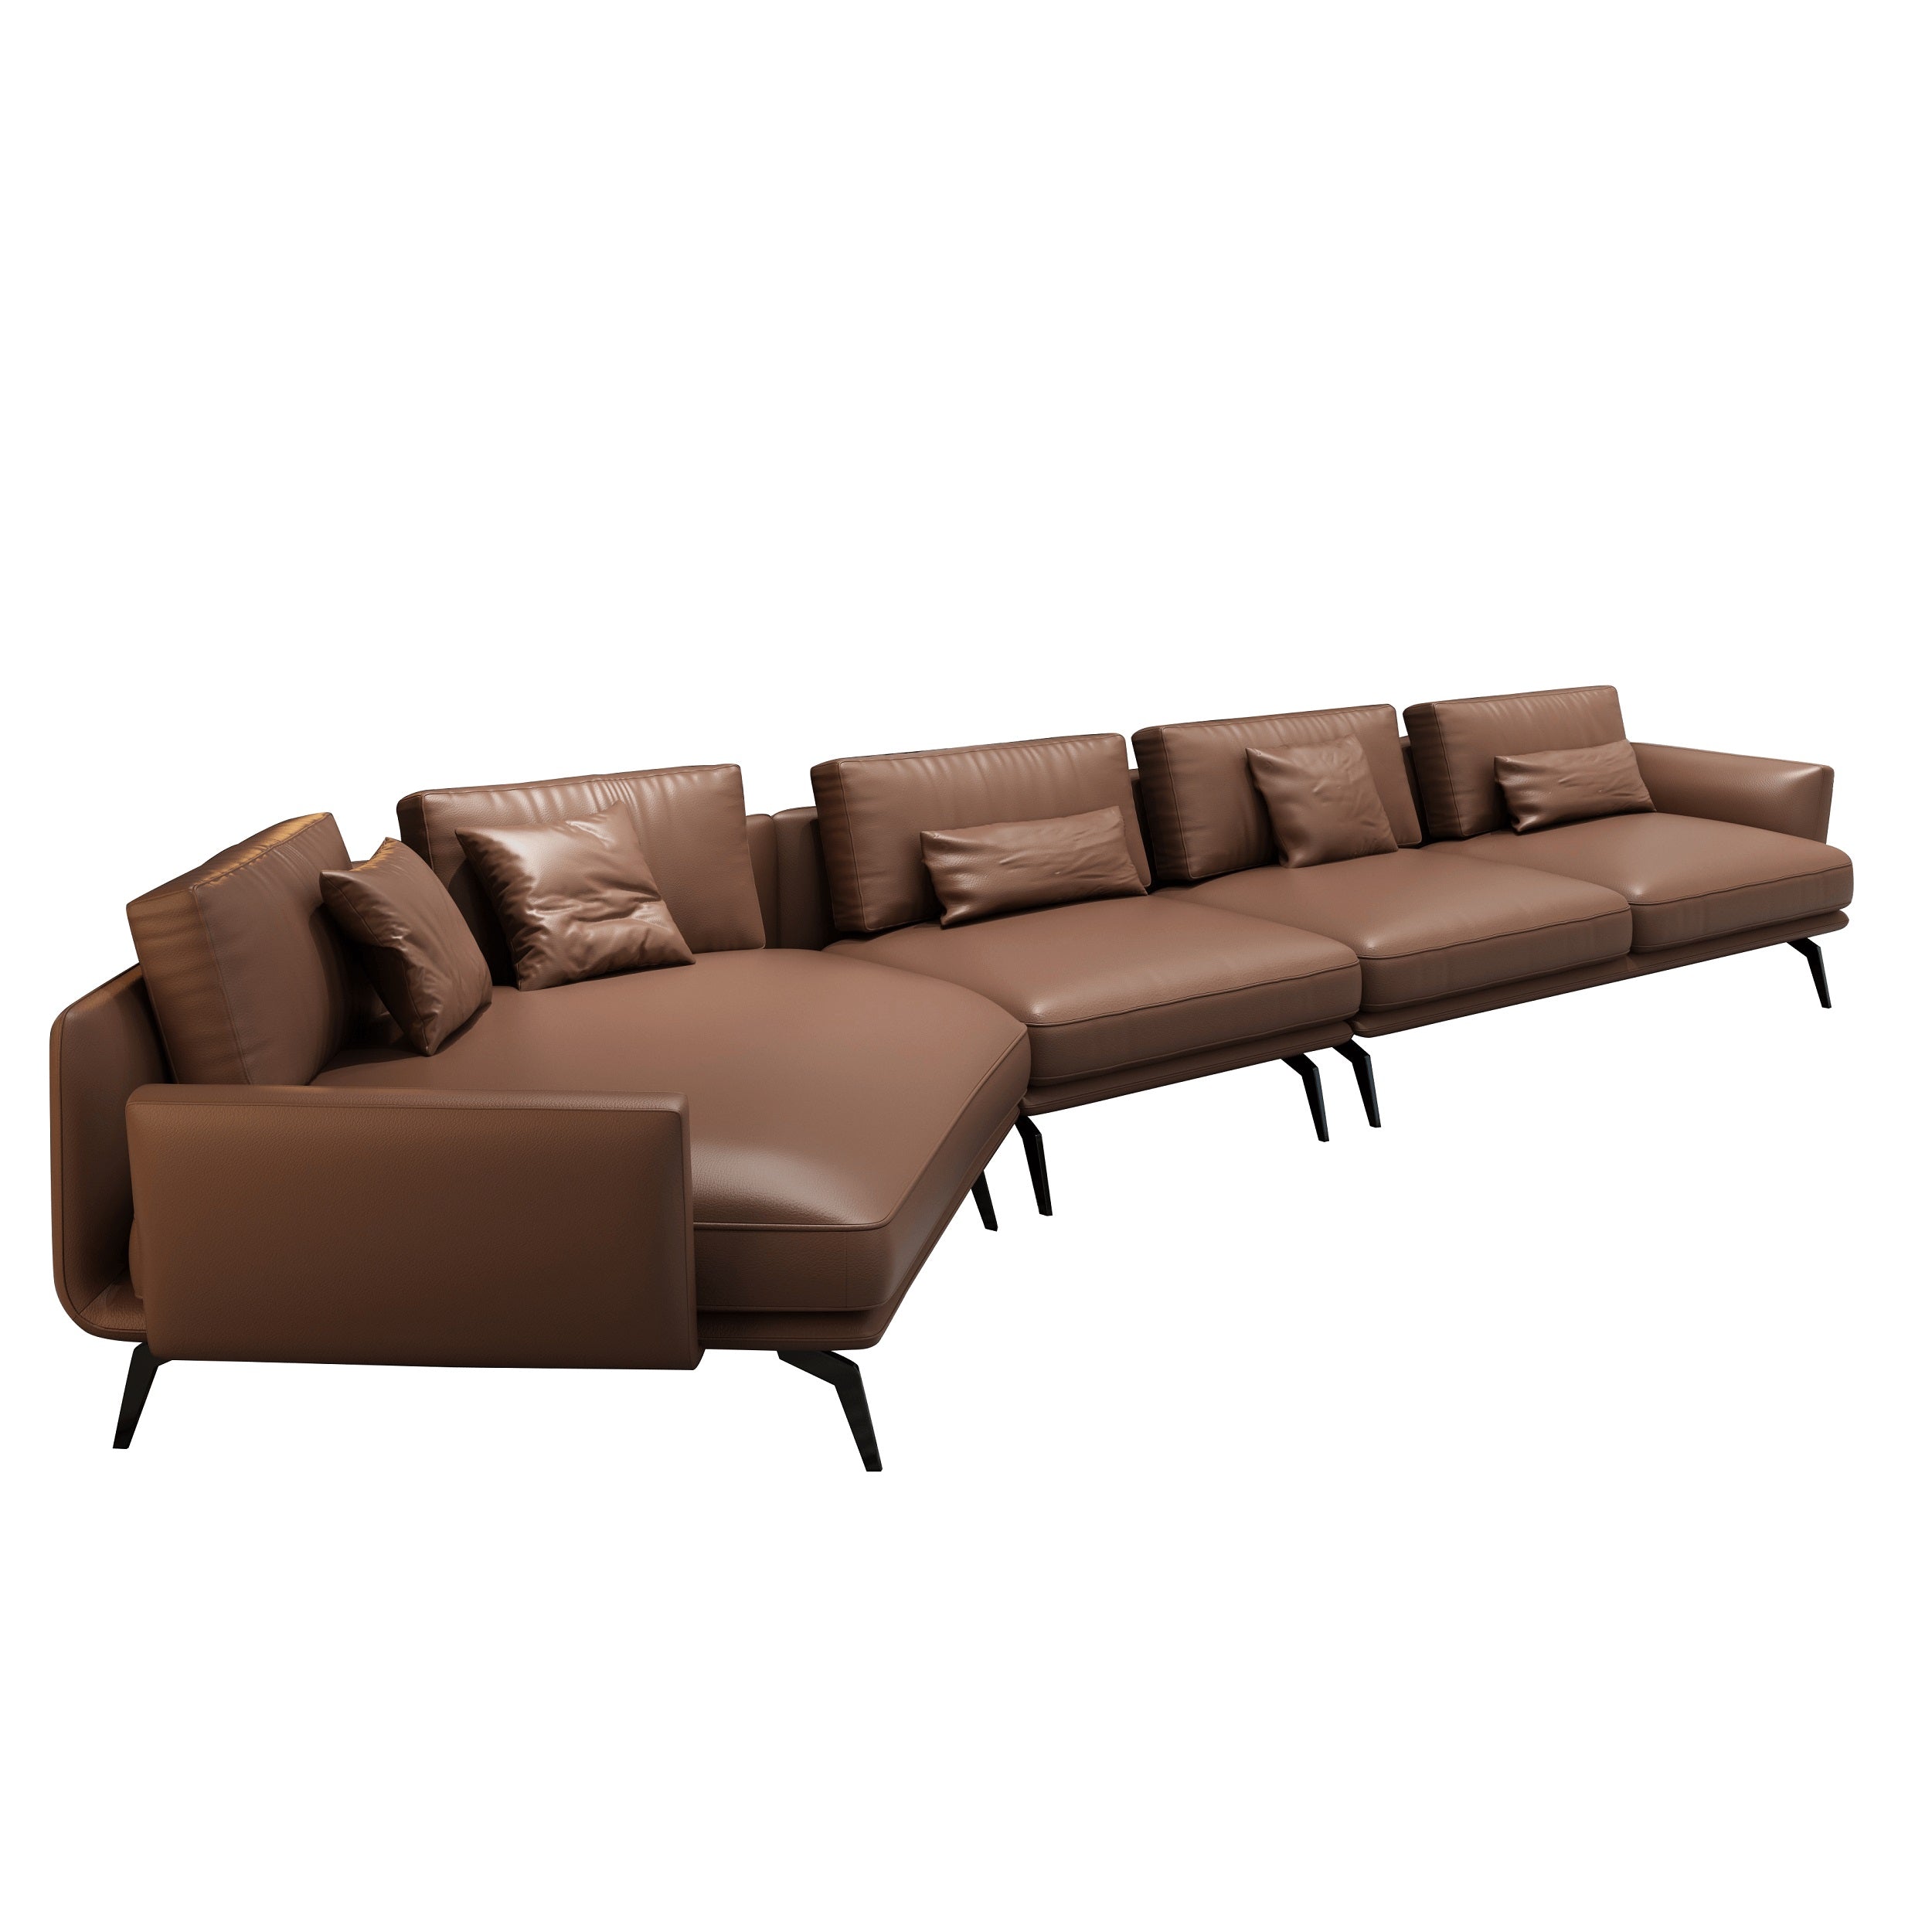 European Furniture - Galaxy Sectional Russet Brown Italian Leather - EF-54432L-3LHC - New Star Living